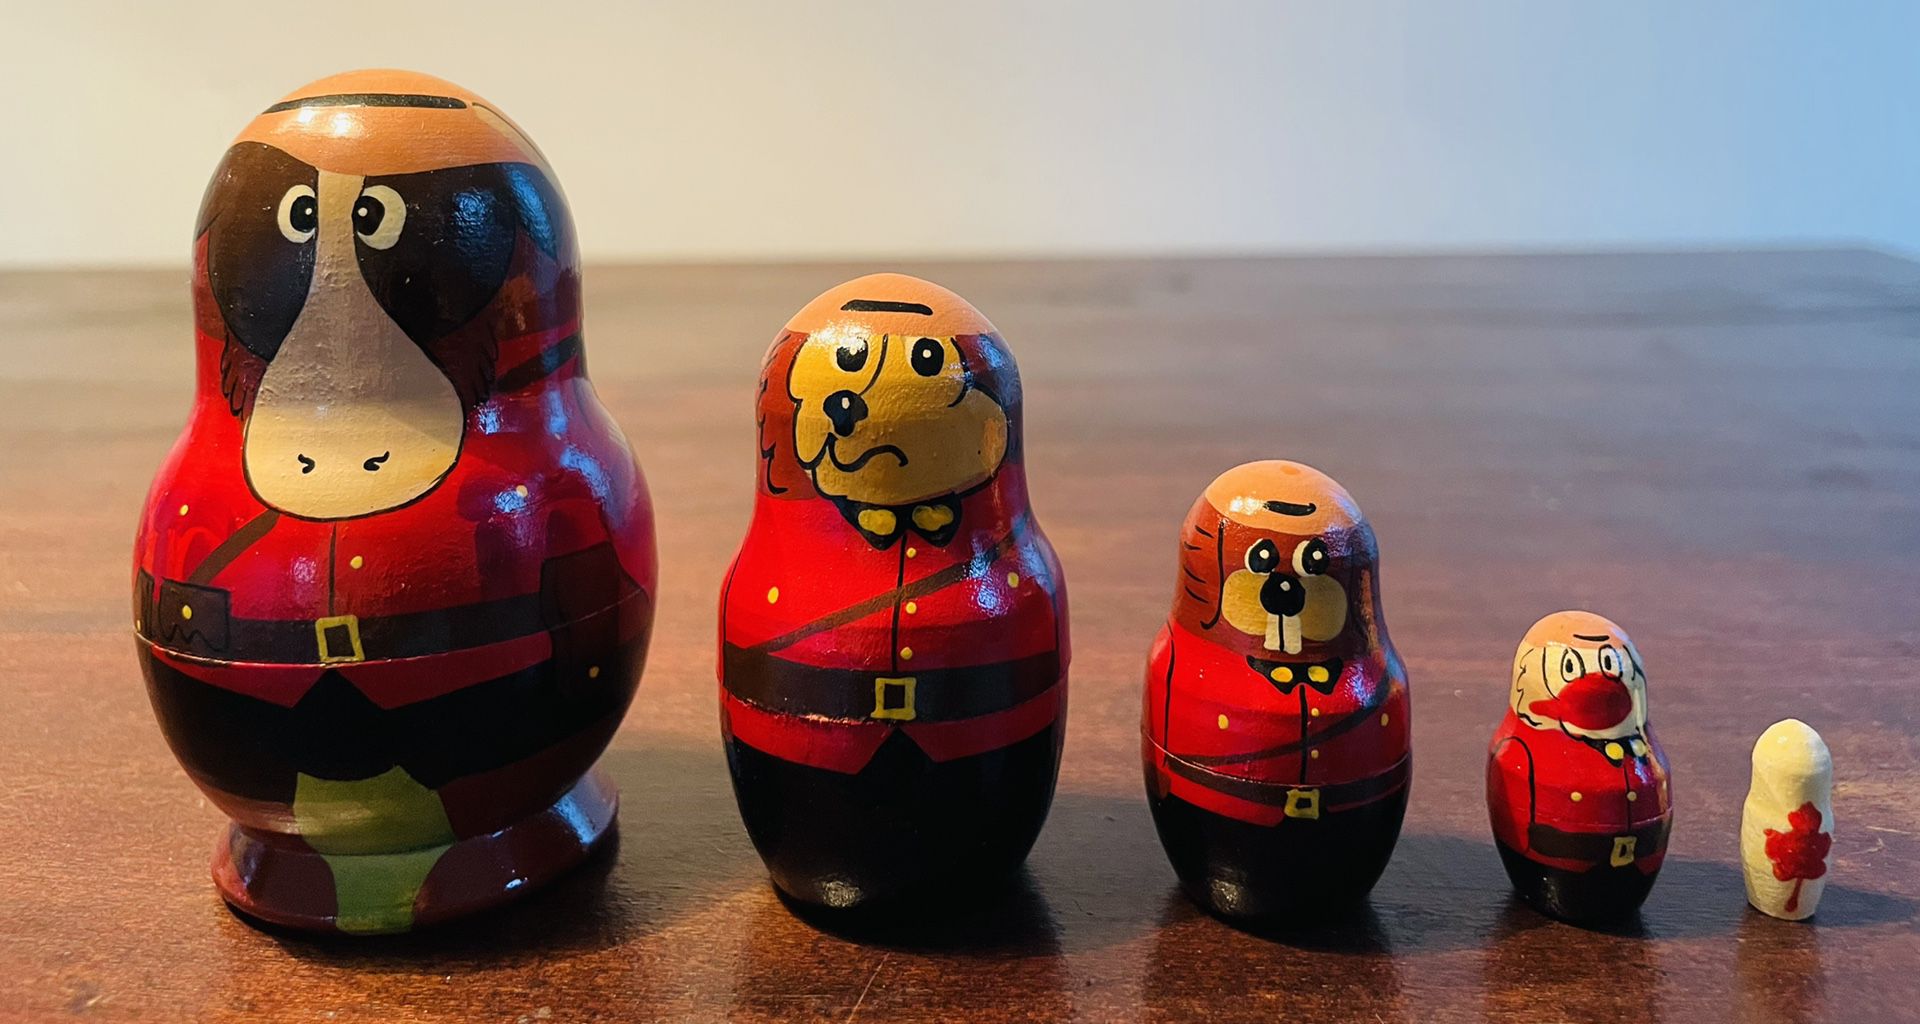 Russian Nesting Dolls Handmade - Purchase Is Tax Deductible 